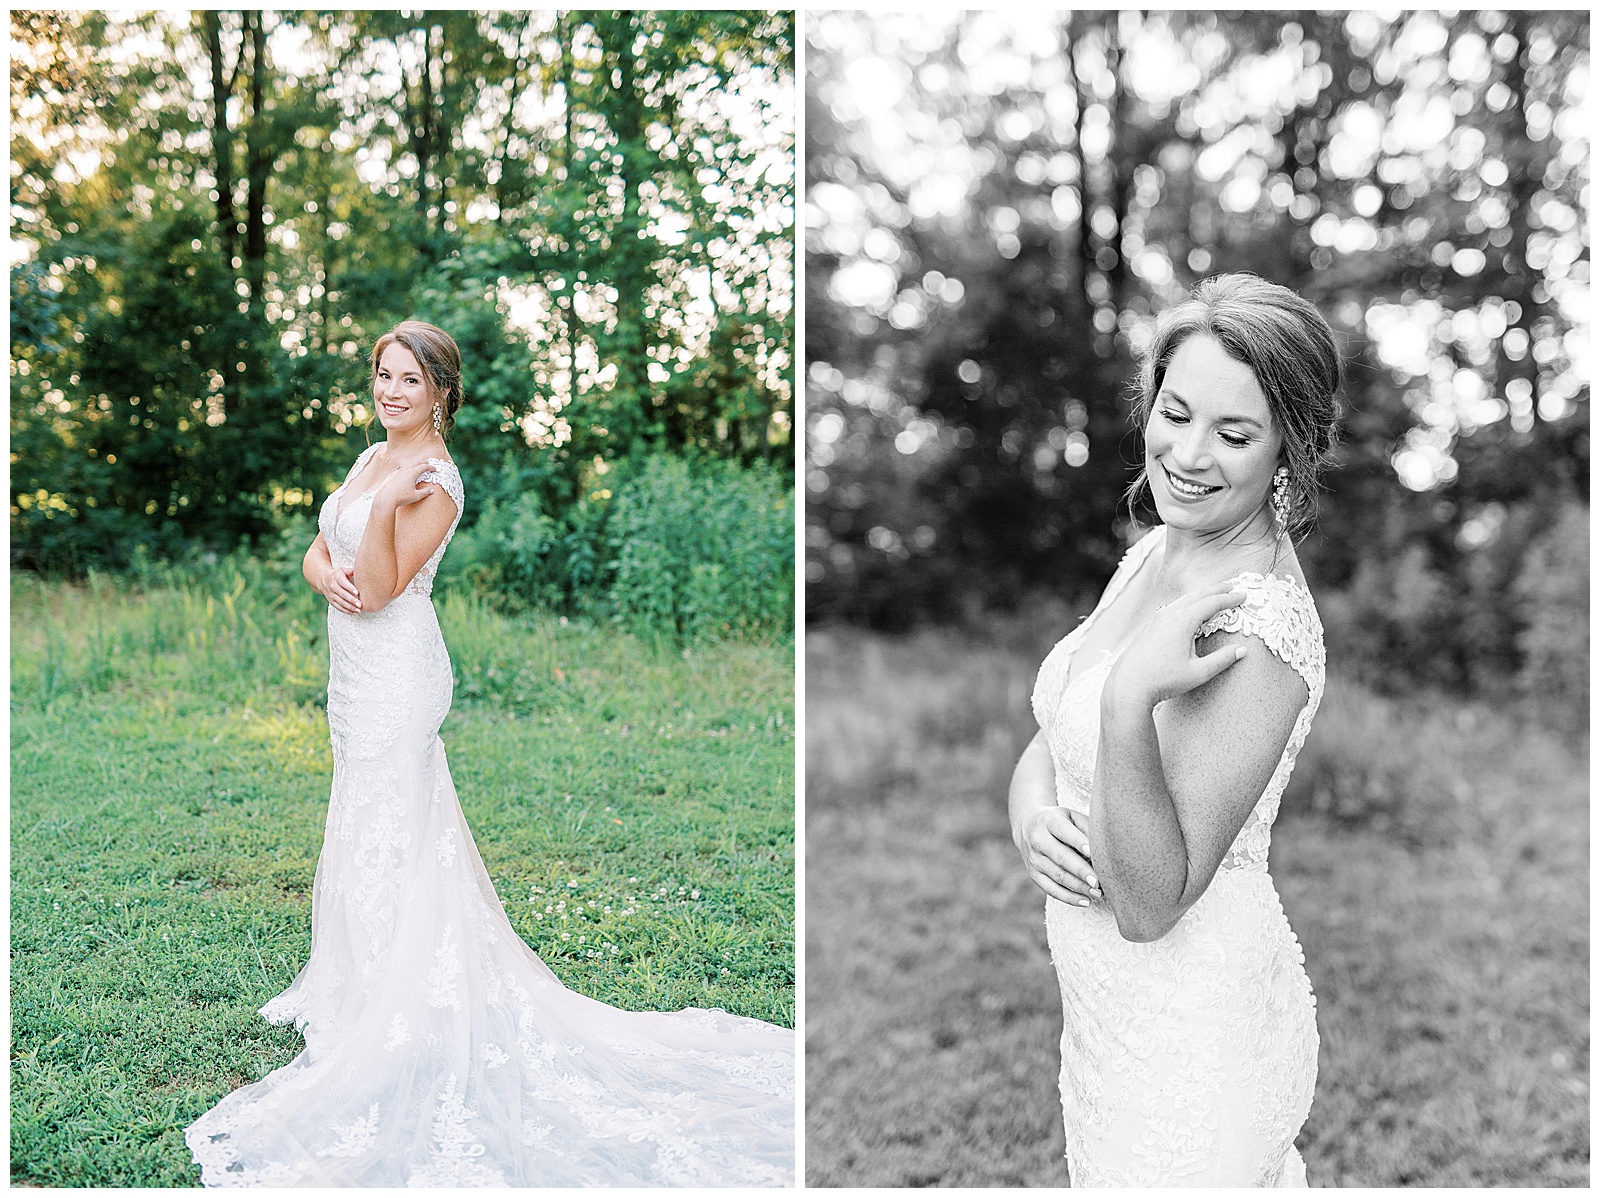 train of long lace wedding dress from sunset bridal portraits in woods and field